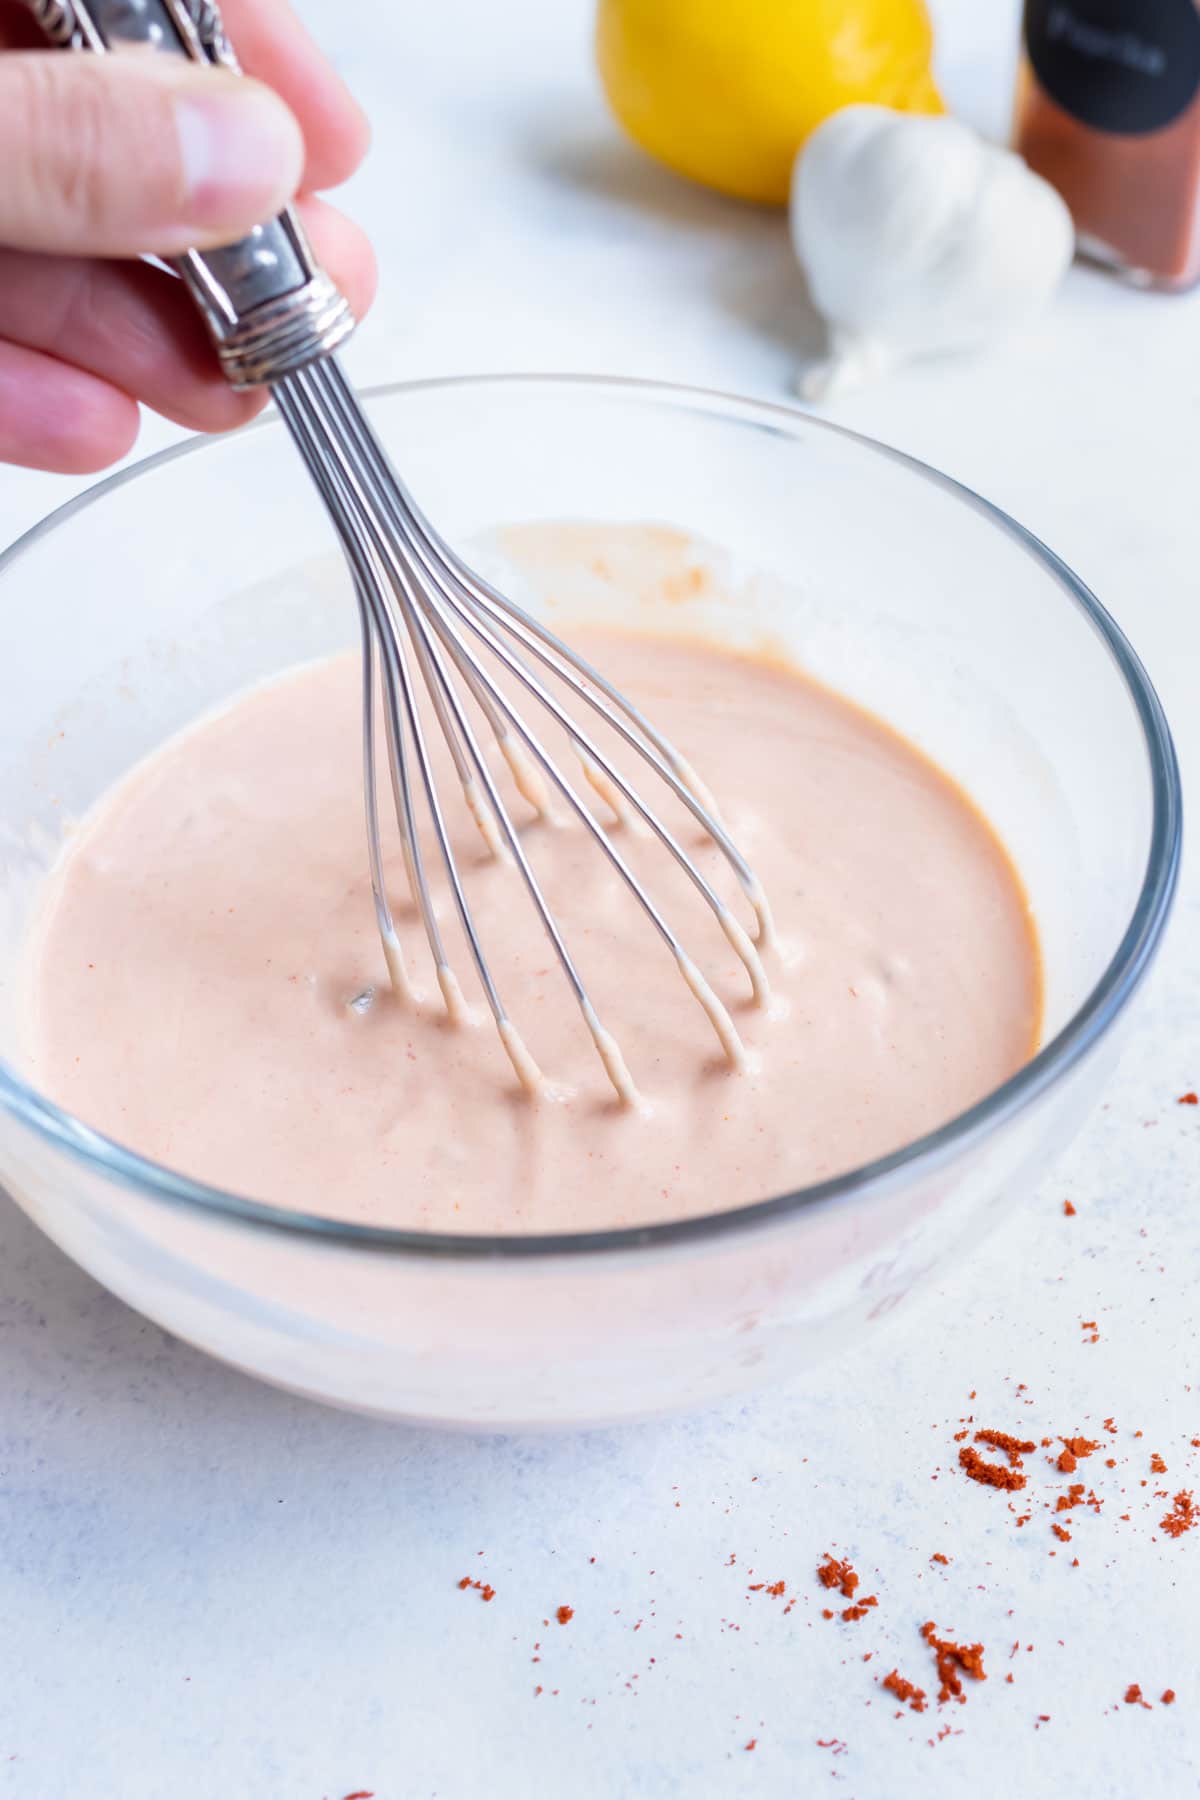 Sauce is made in just 5 minutes with a whisk.